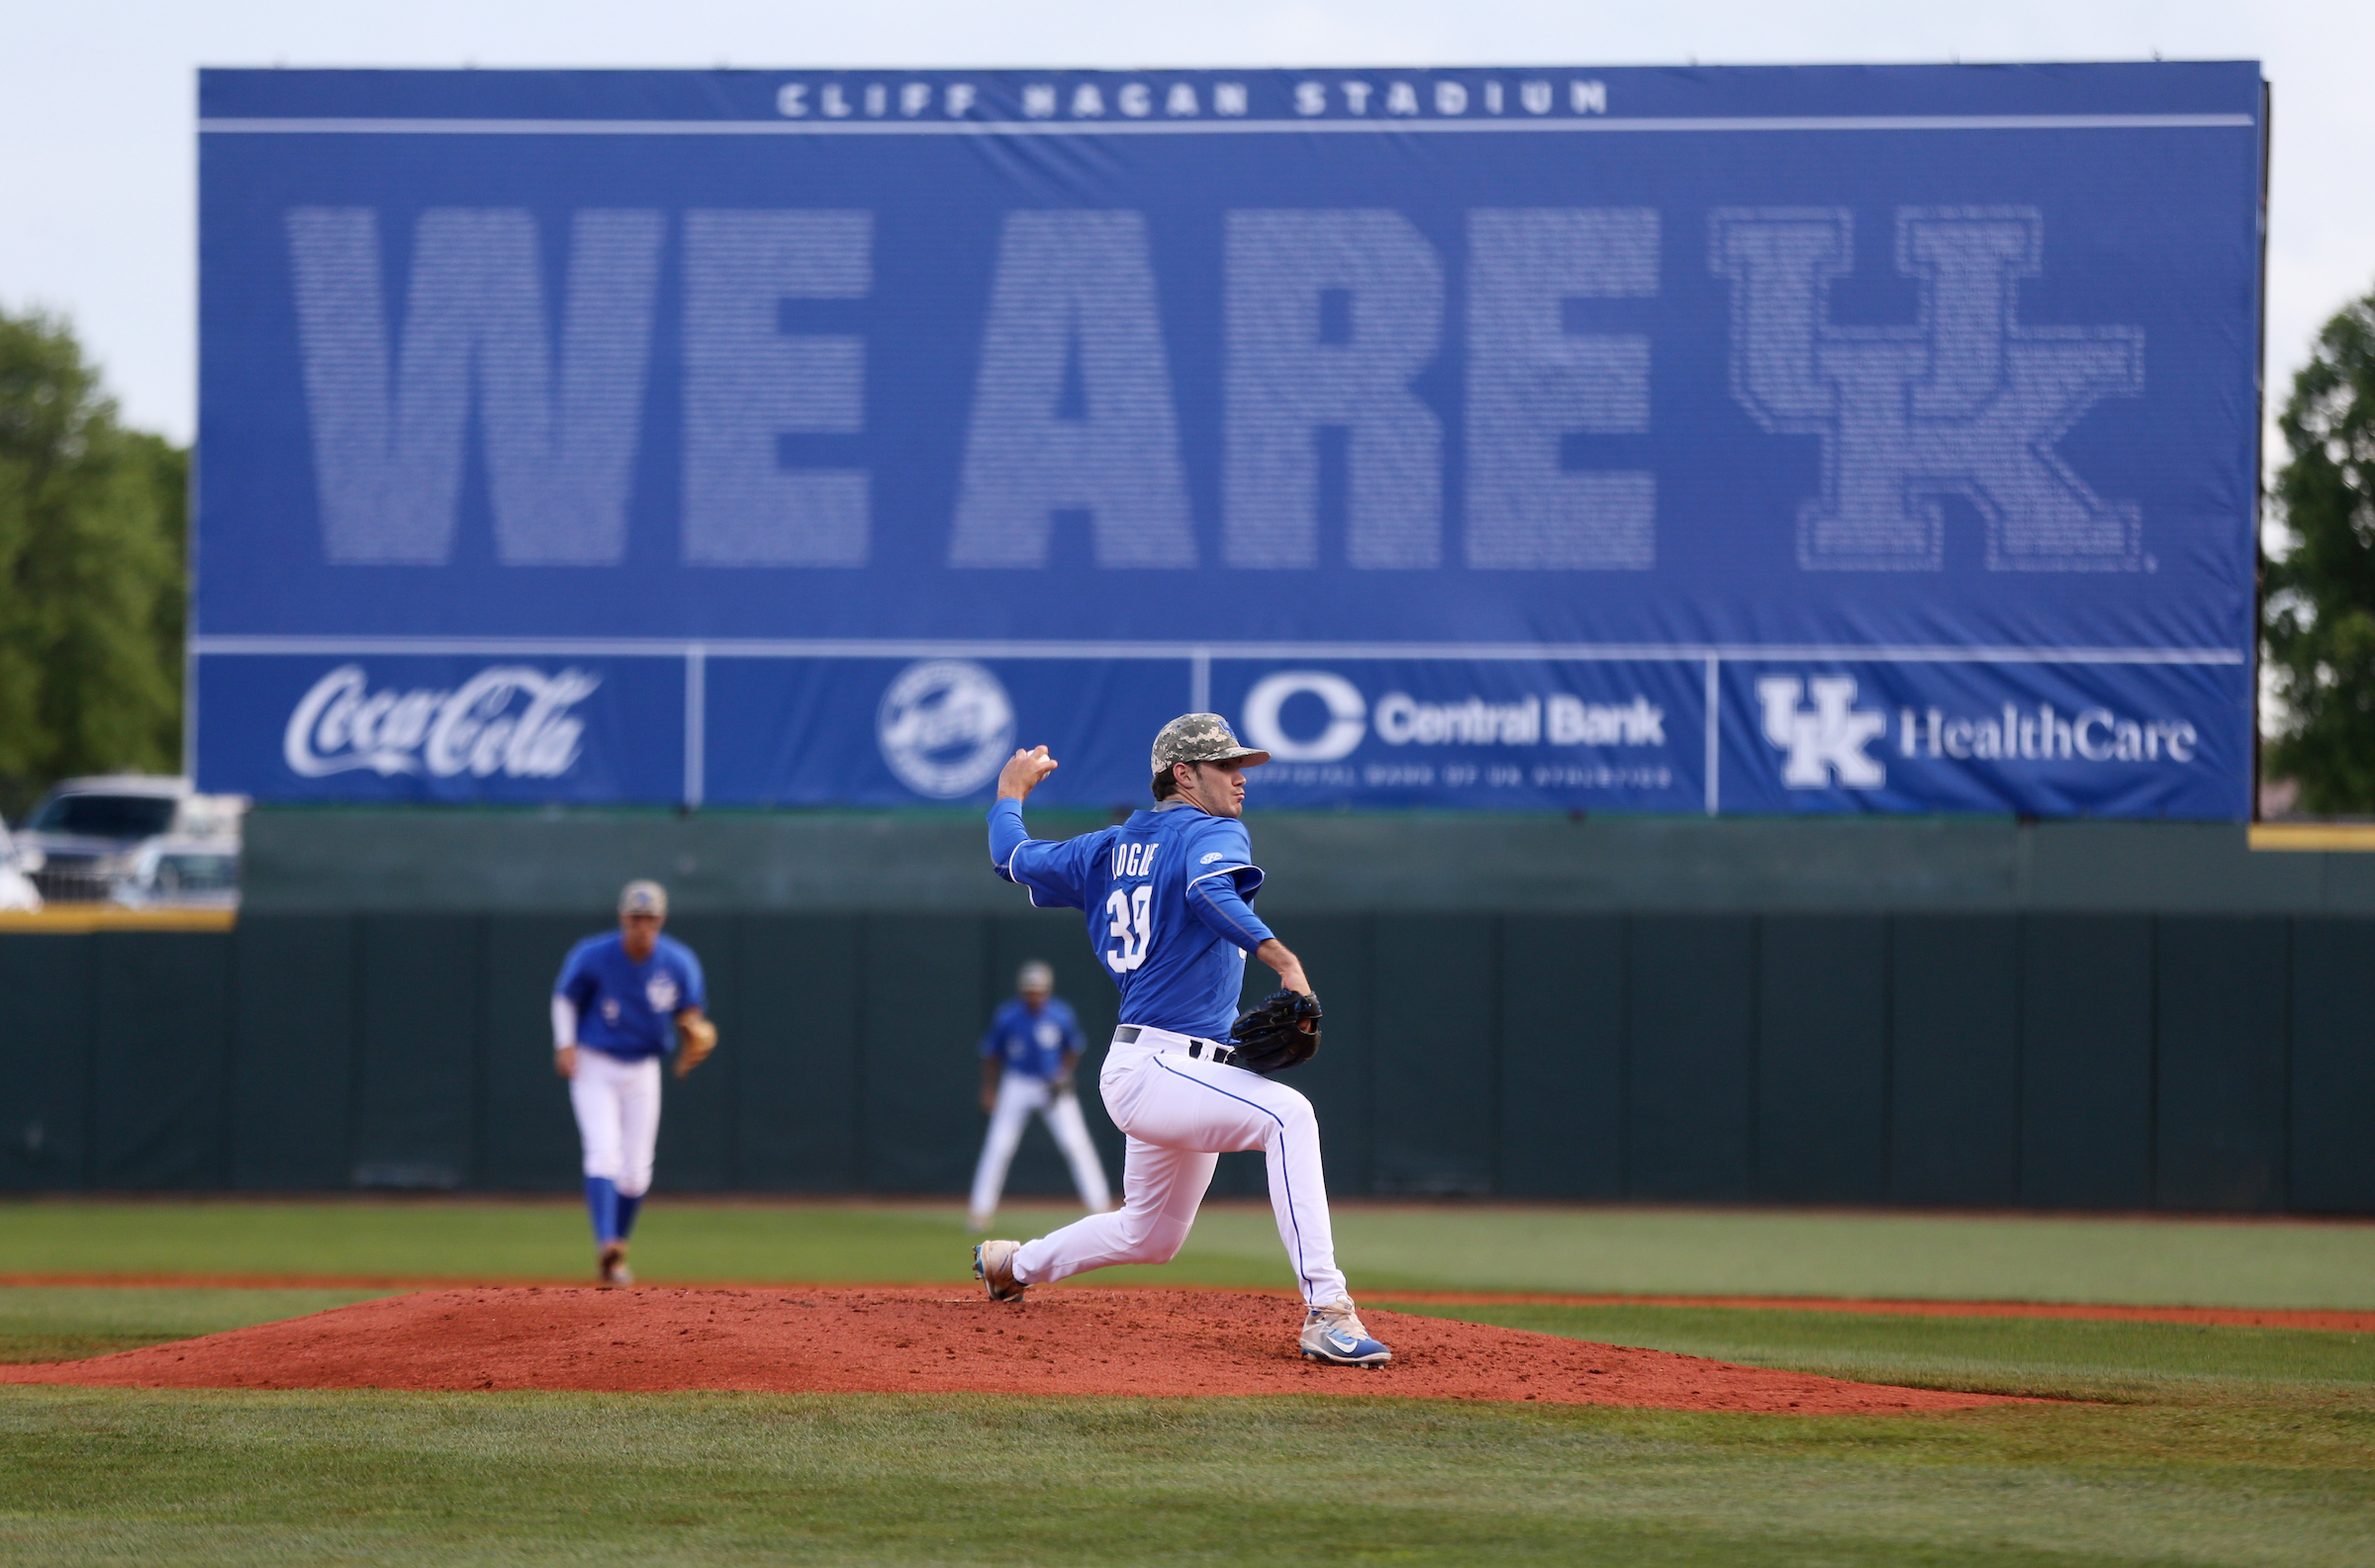 Squires’ Four RBI, Logue’s Career-High 11 Strikeouts Pace Kentucky